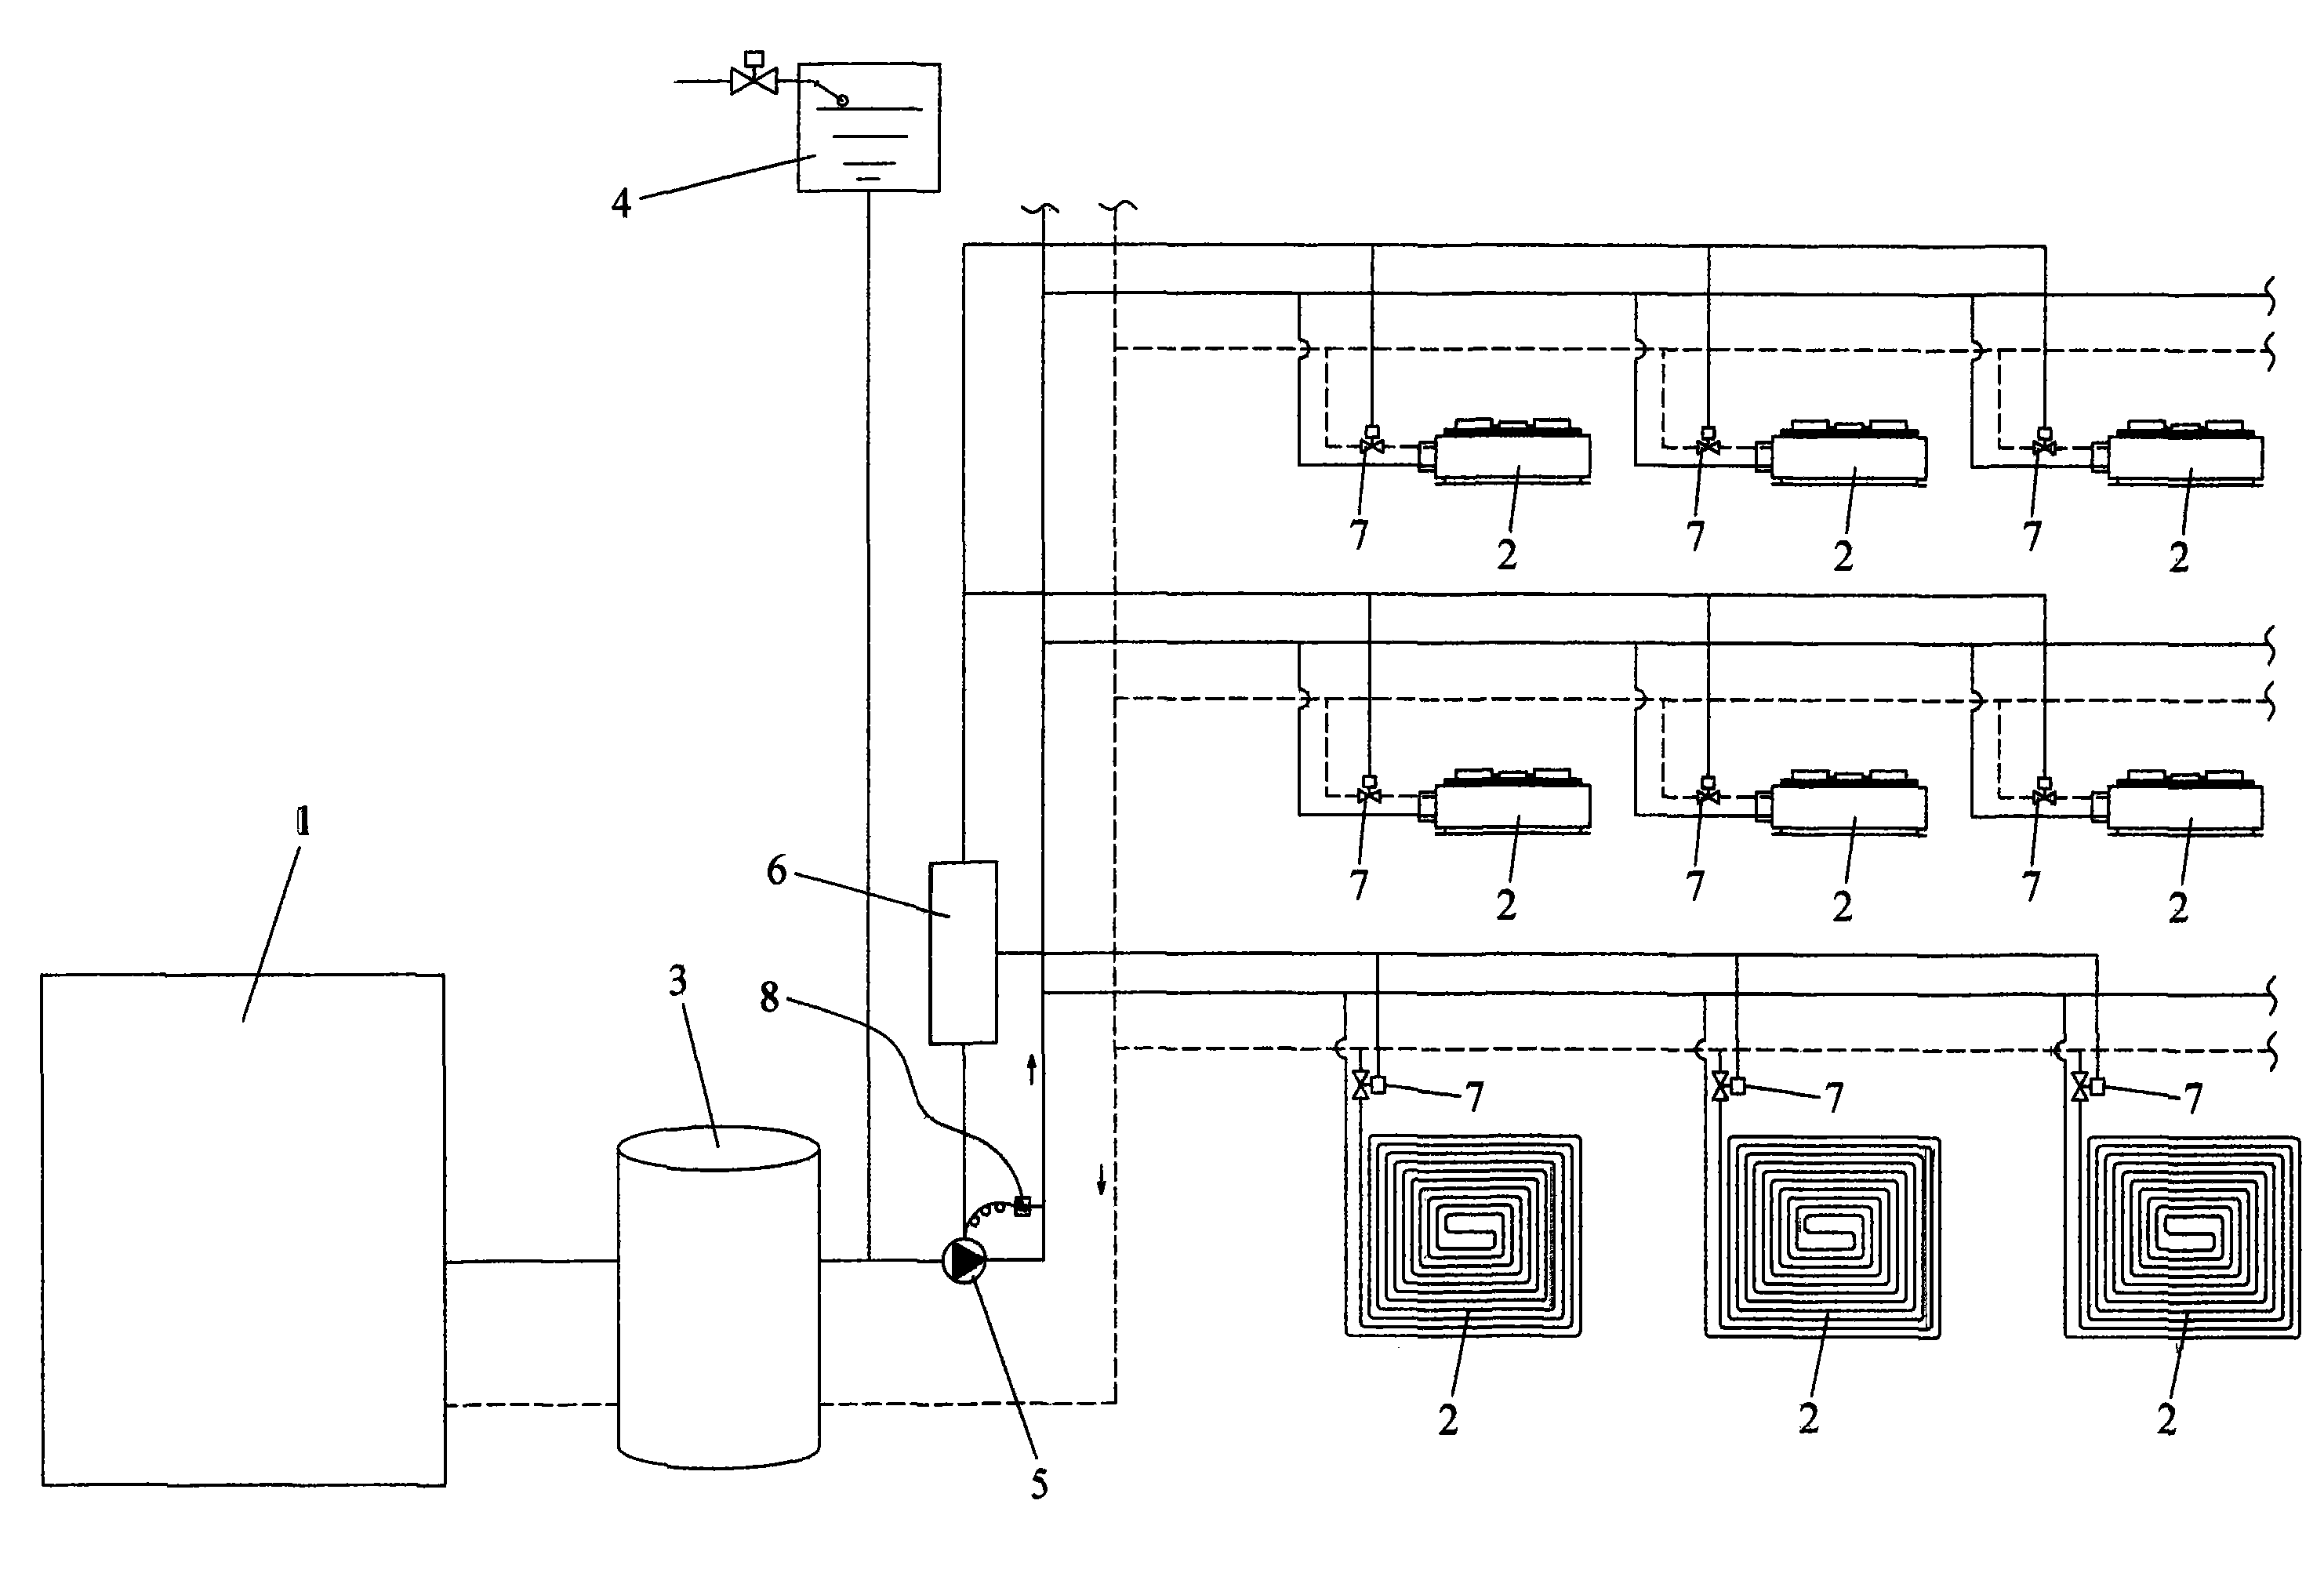 Multiple variable-flow household water system central air condition